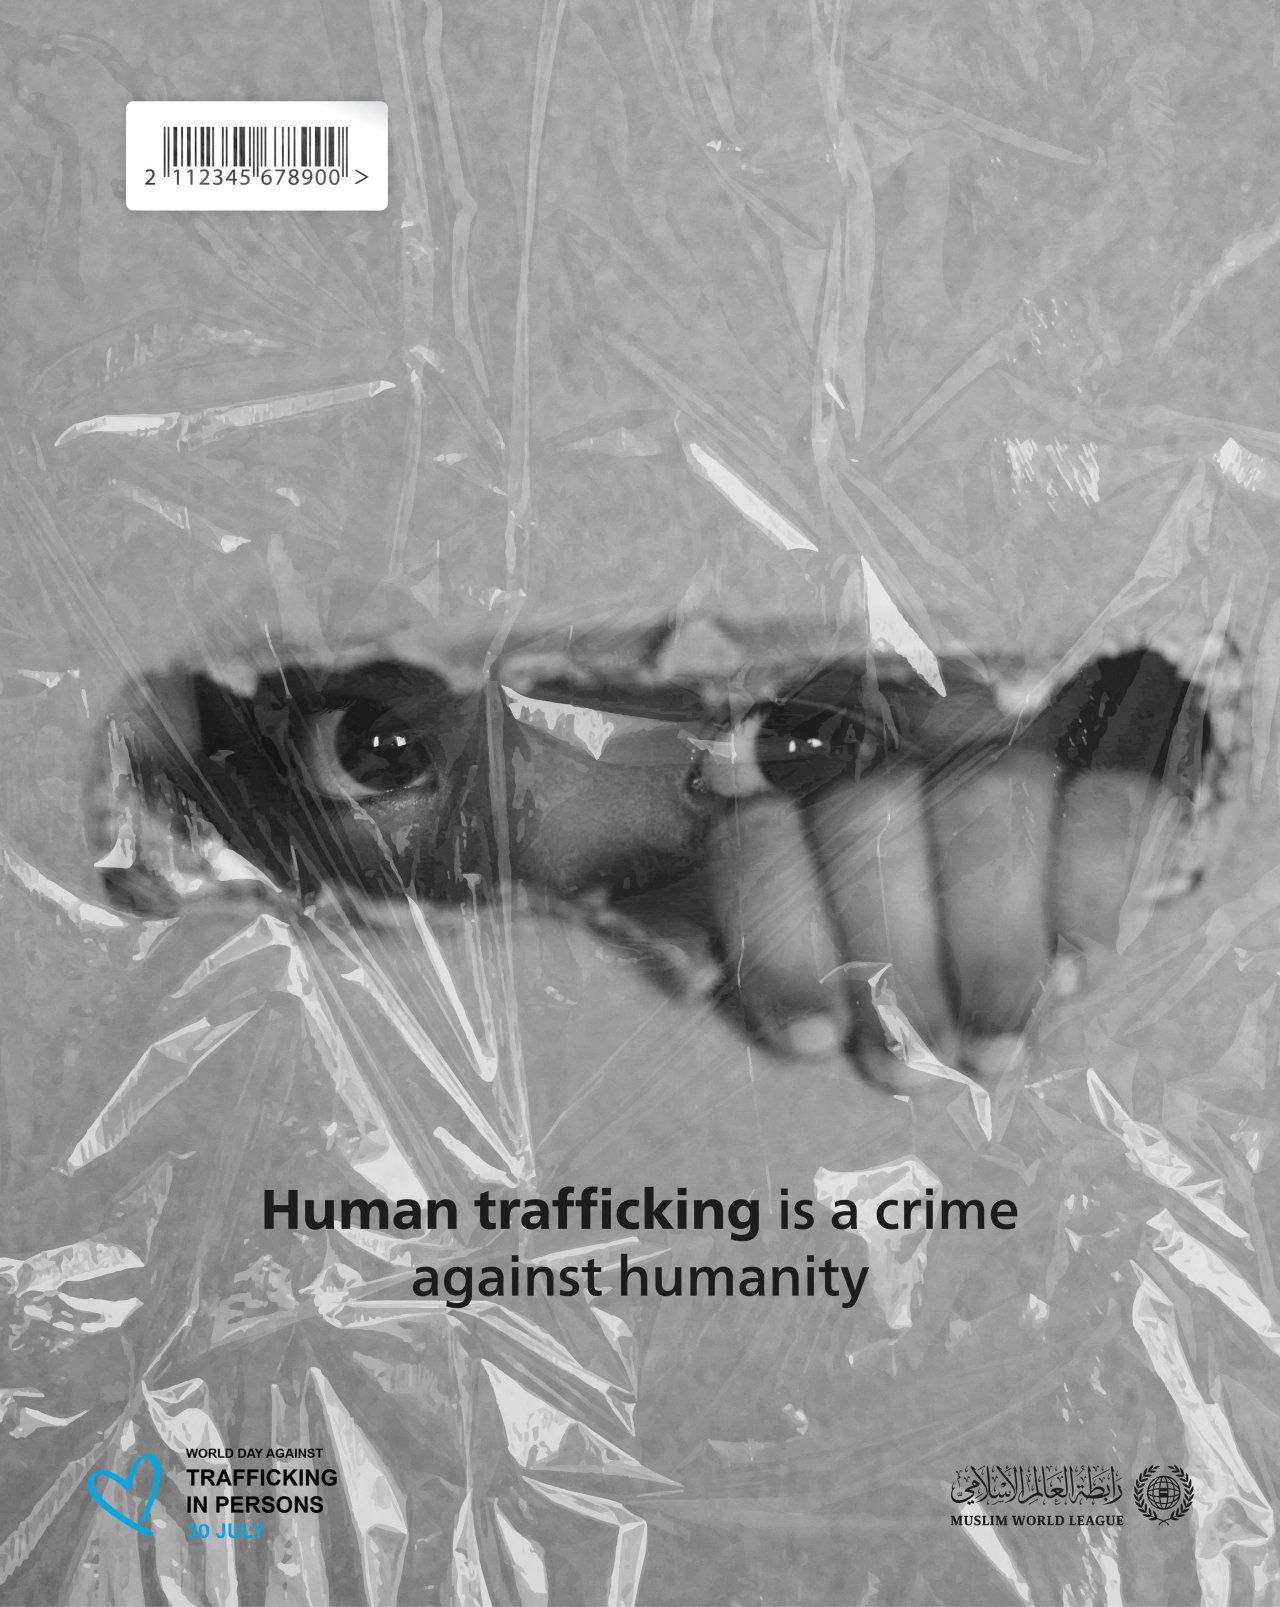 Human trafficking is a crime against humanity and violates humanity’s shared values